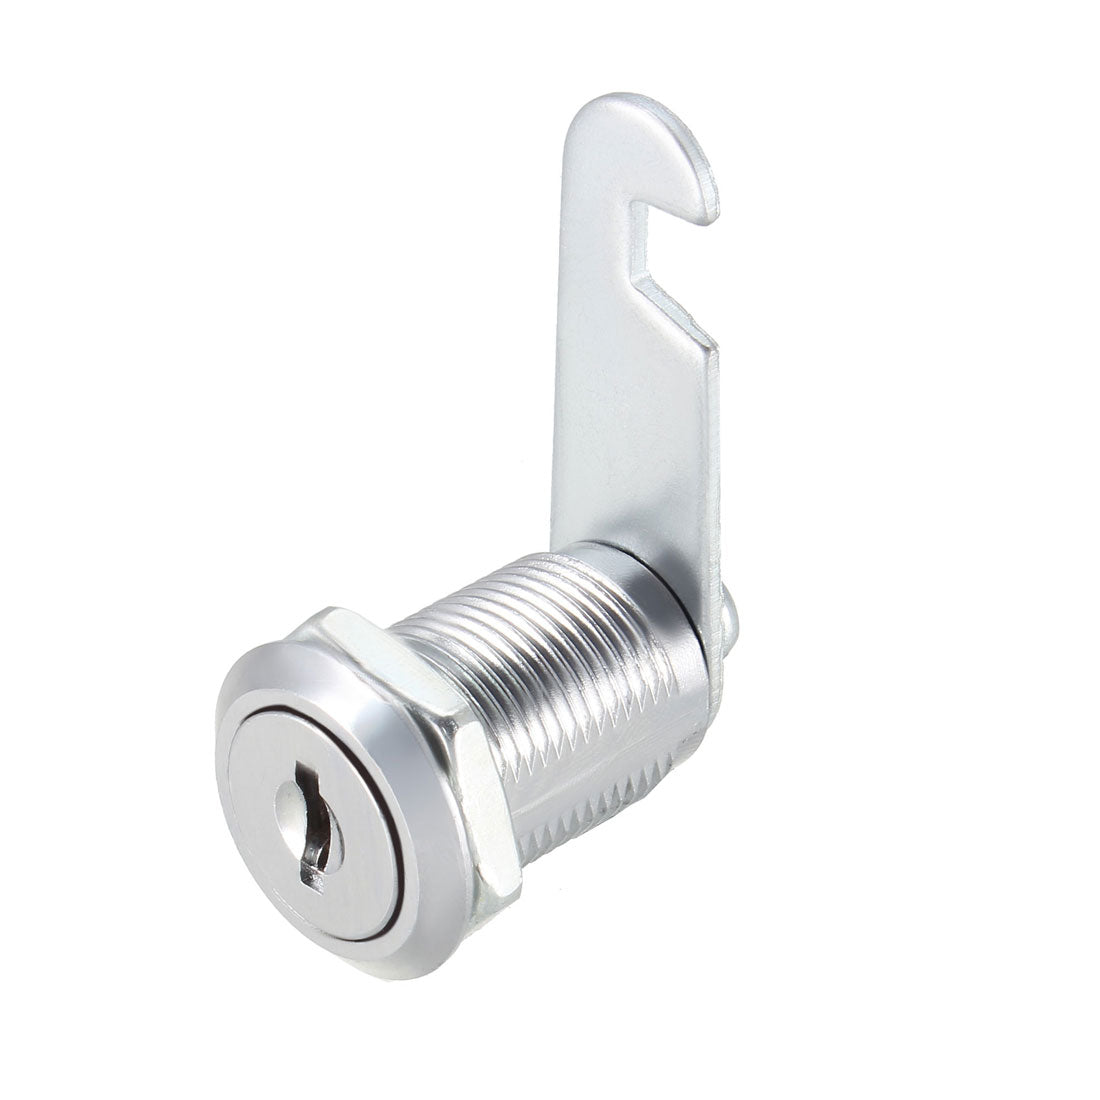 uxcell Uxcell Cam Lock 25mm Cylinder Length Fit Up to 5/8-inch Thick Panel Keyed Alike 2Pcs